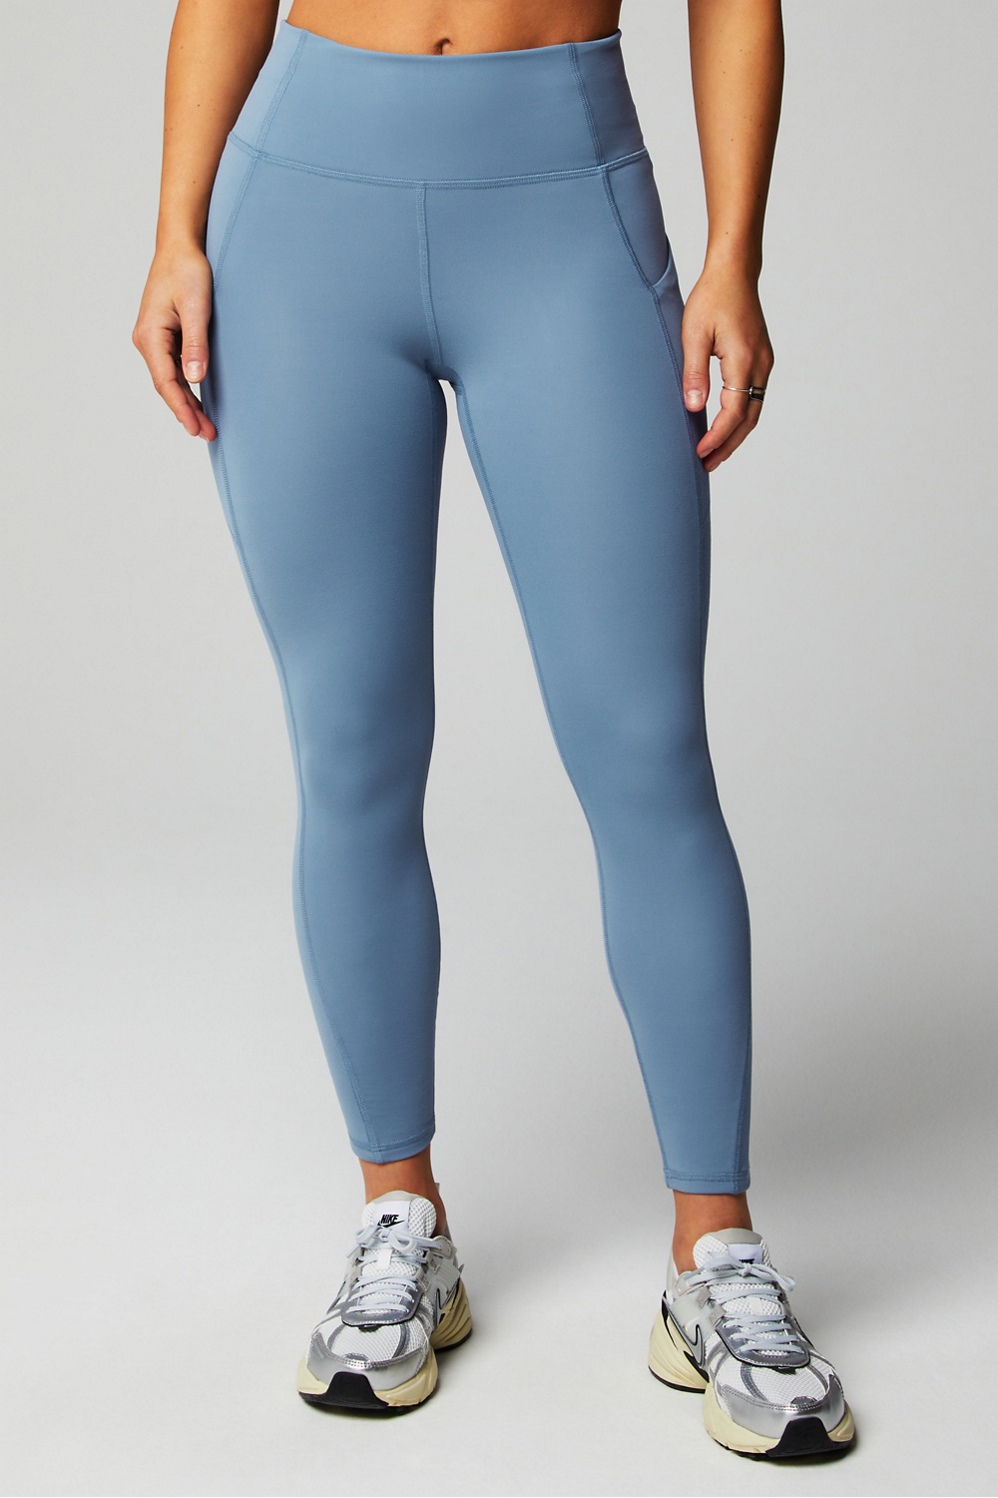 Does anyone know the name of these light blue leggings? Or the